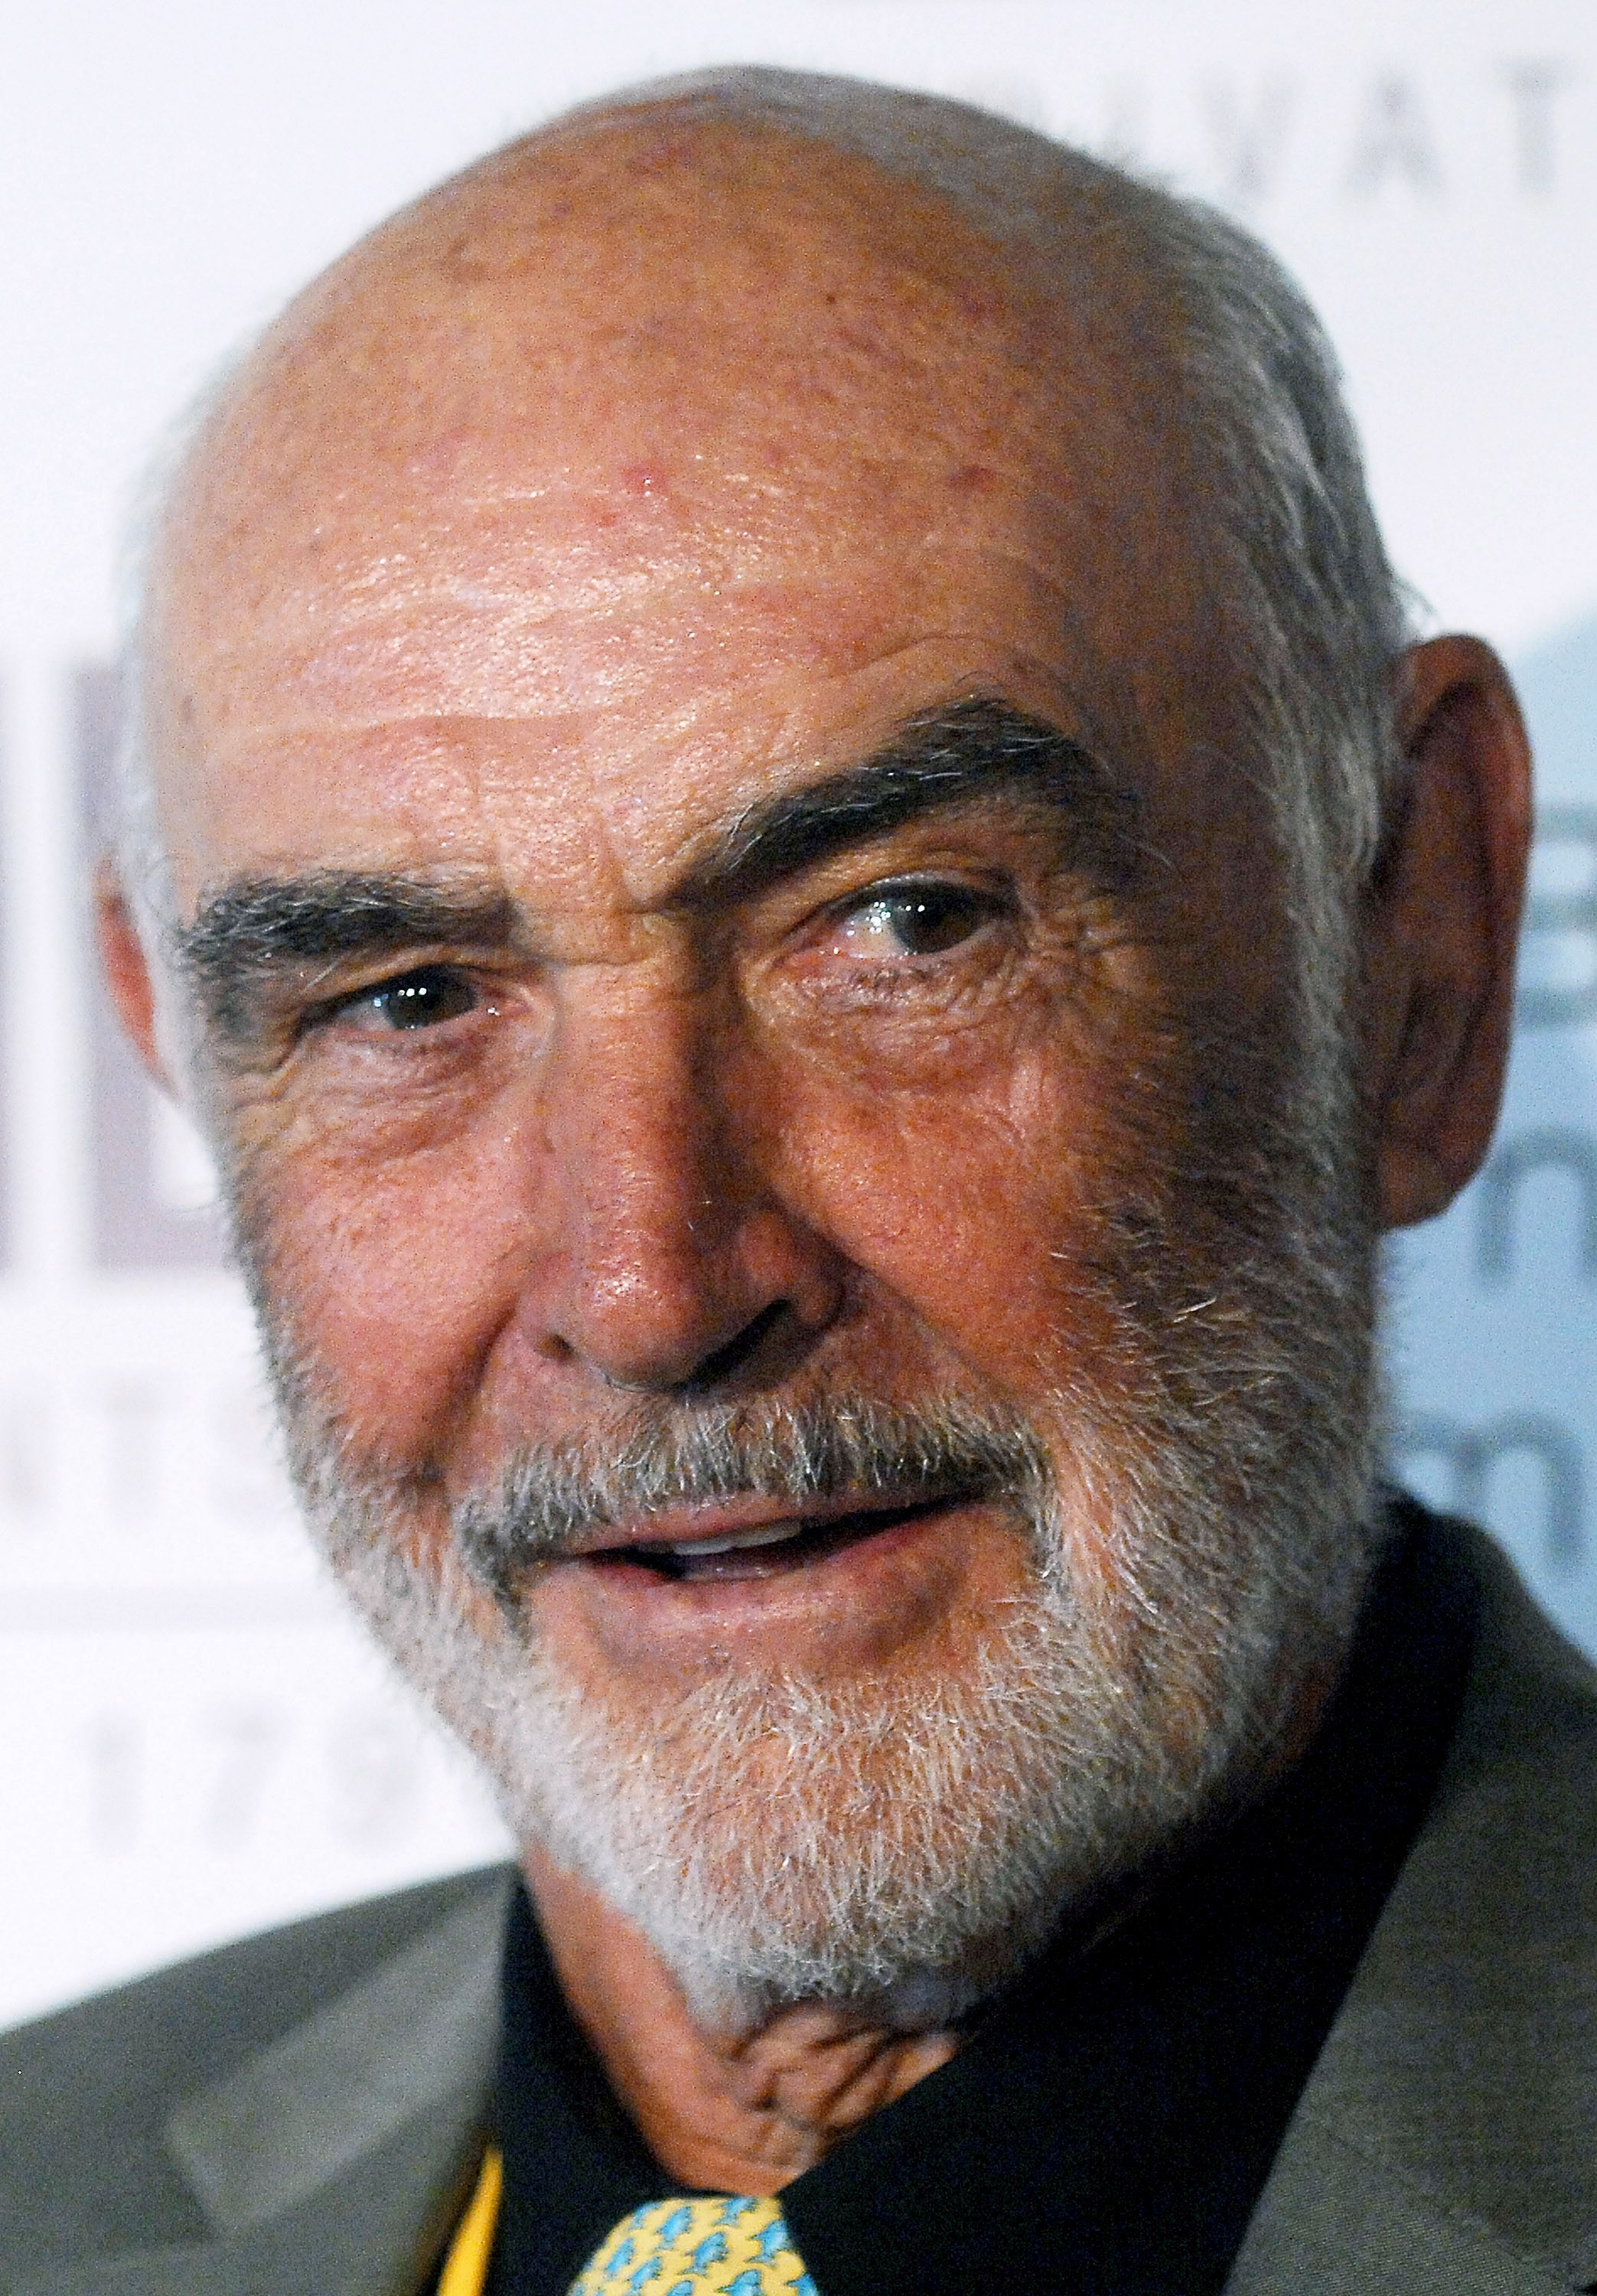 Sean Connery in 2009 in Nassau, Bahamaas. (Gustavo Caballero—Getty Images)